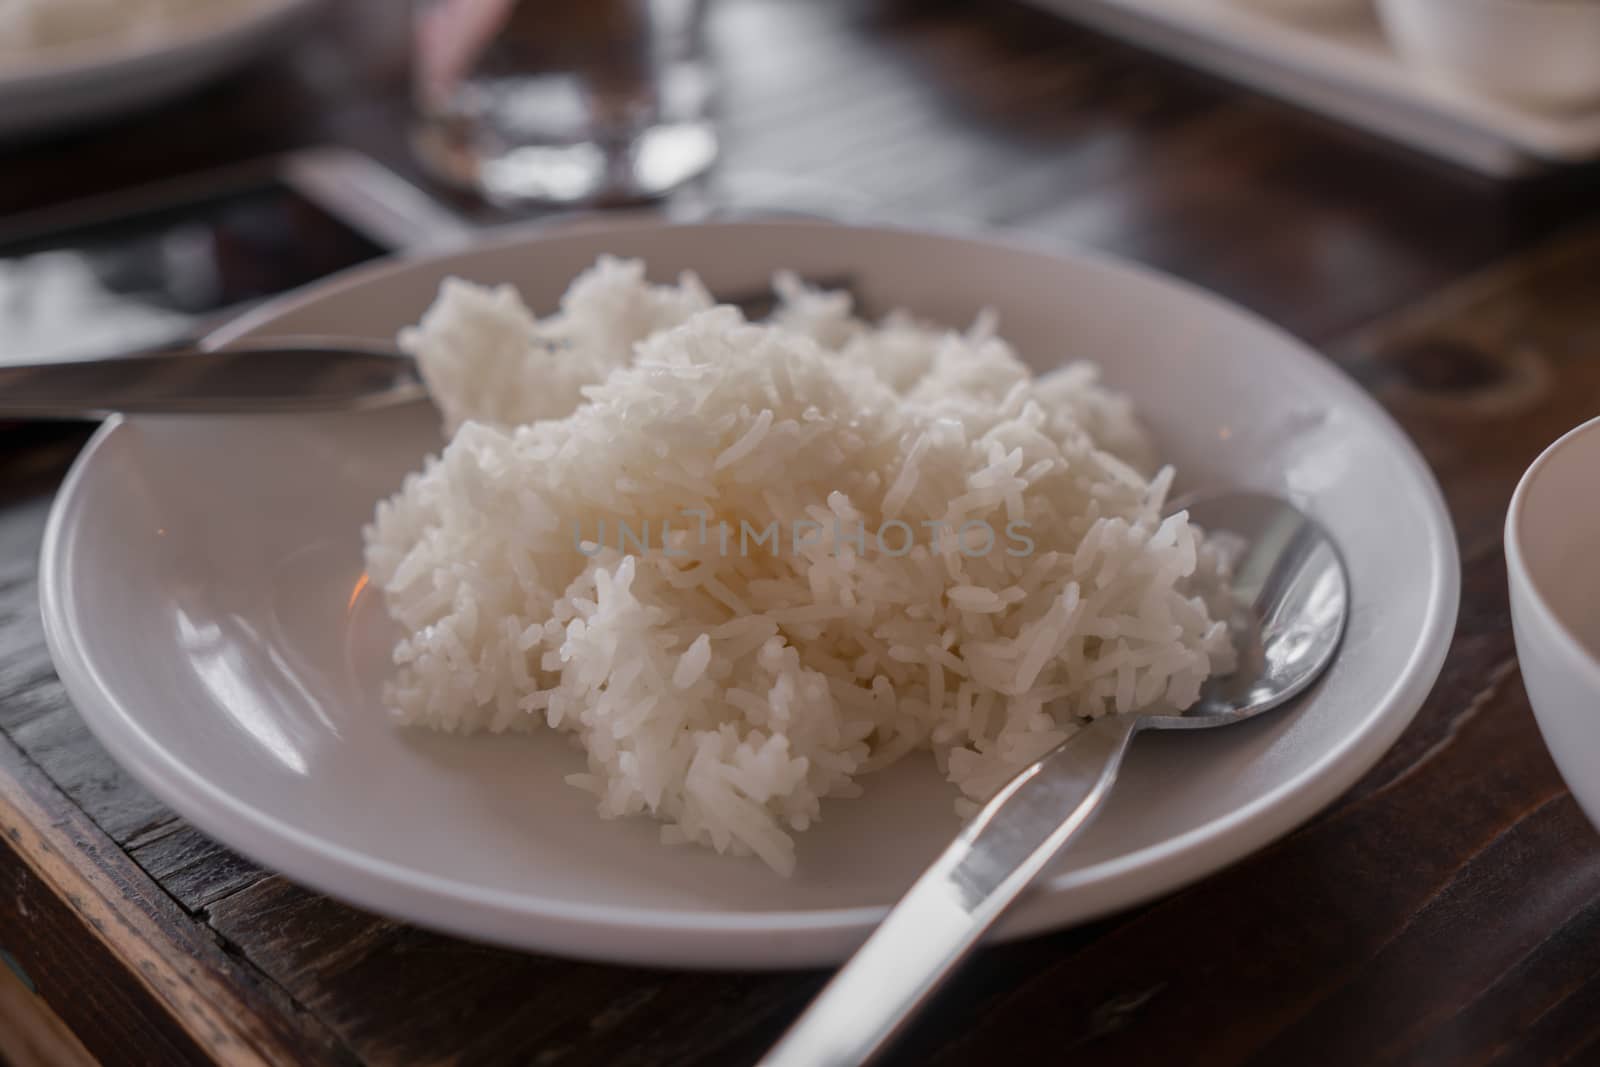 Rice in plates and utensils, ready to eat by Buttus_casso